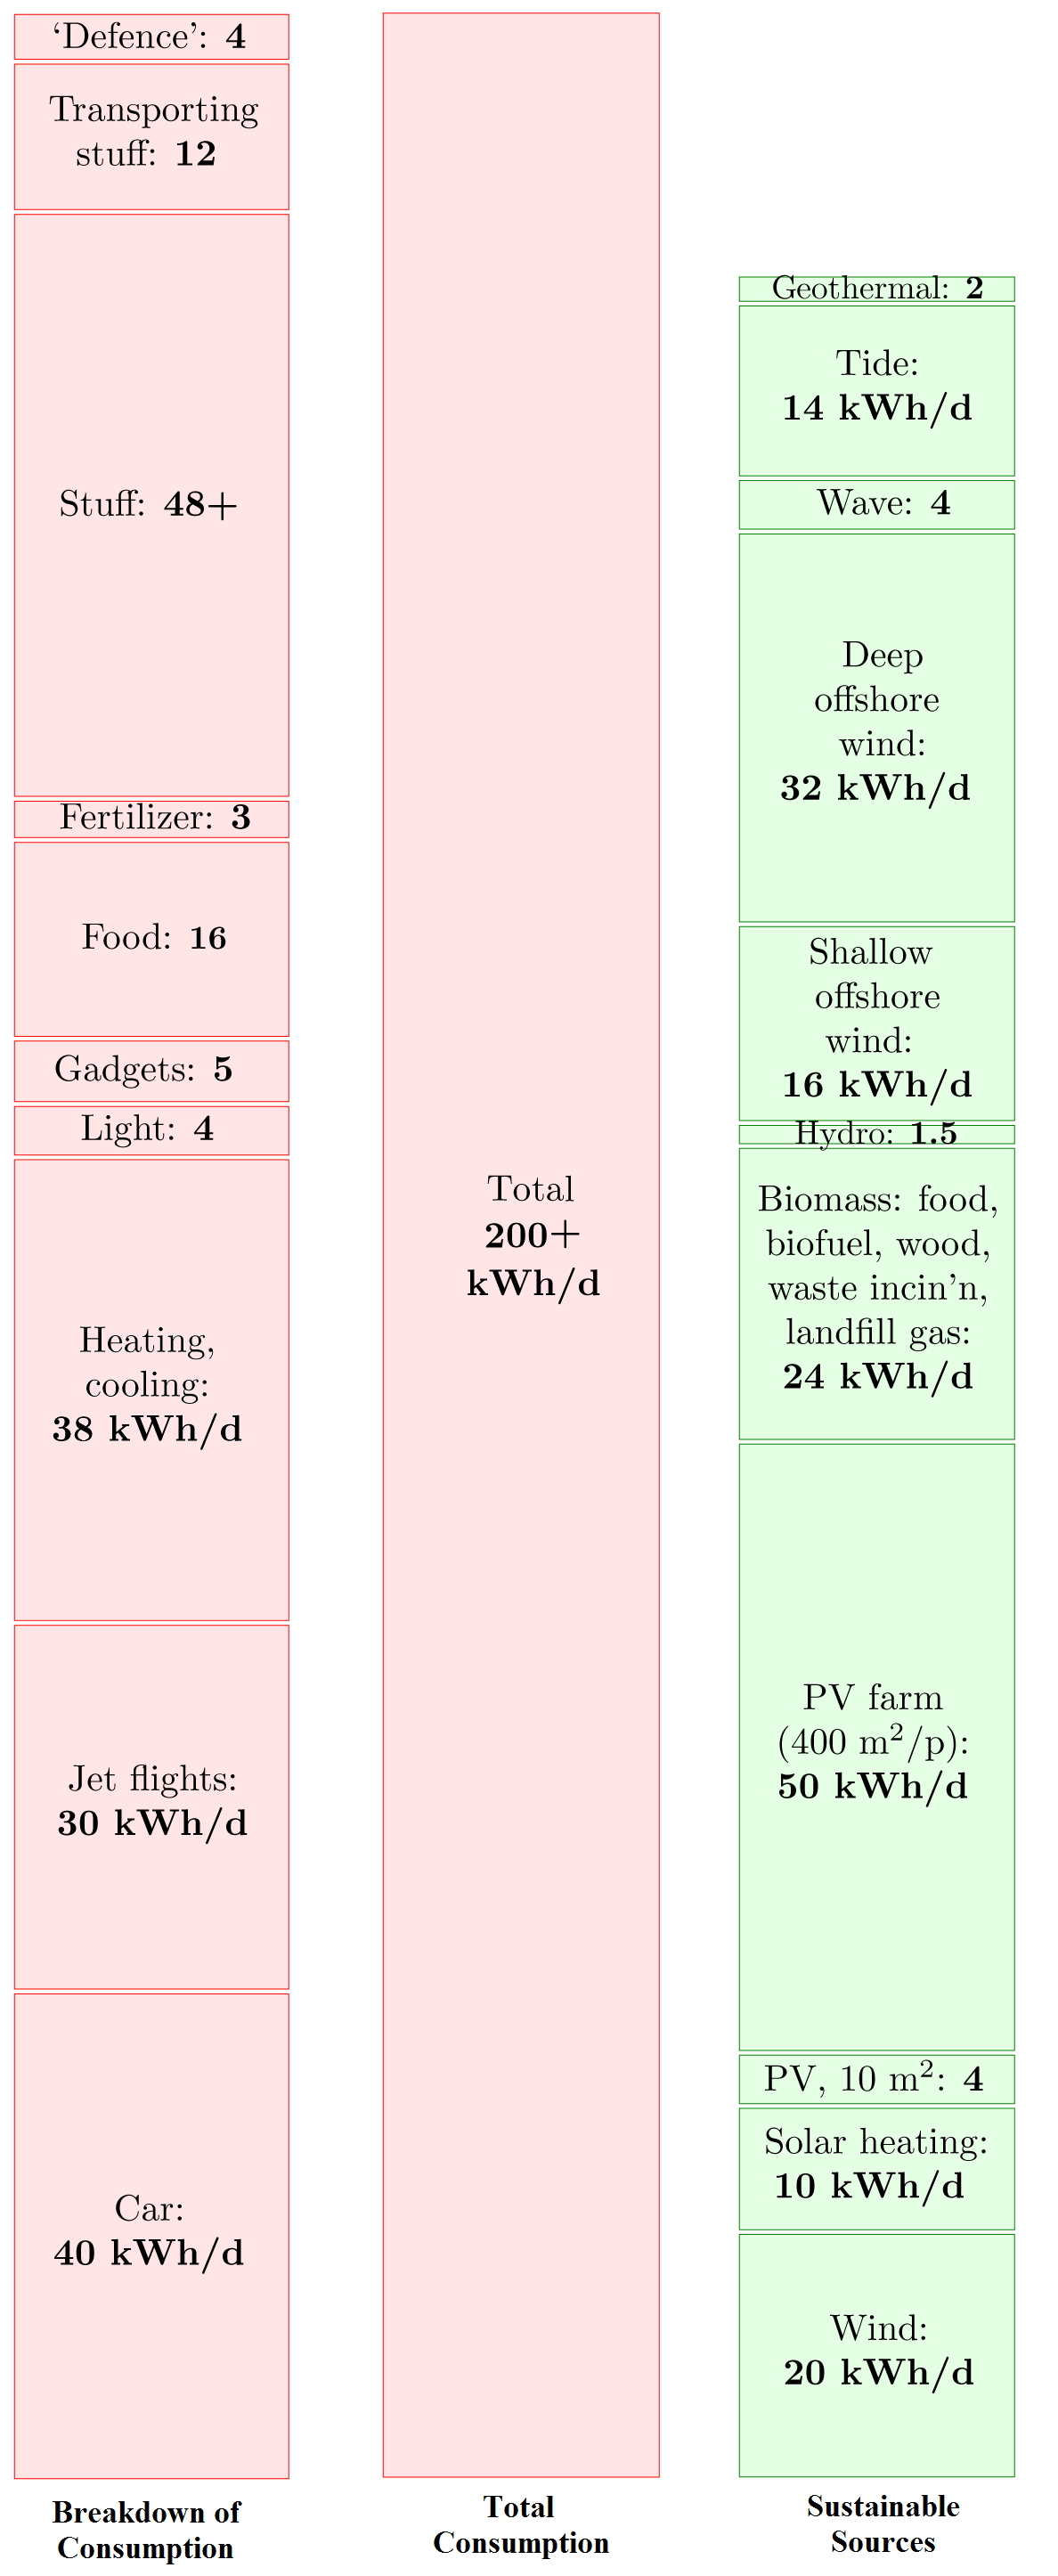 A breakdown of energy use and possible energy sources